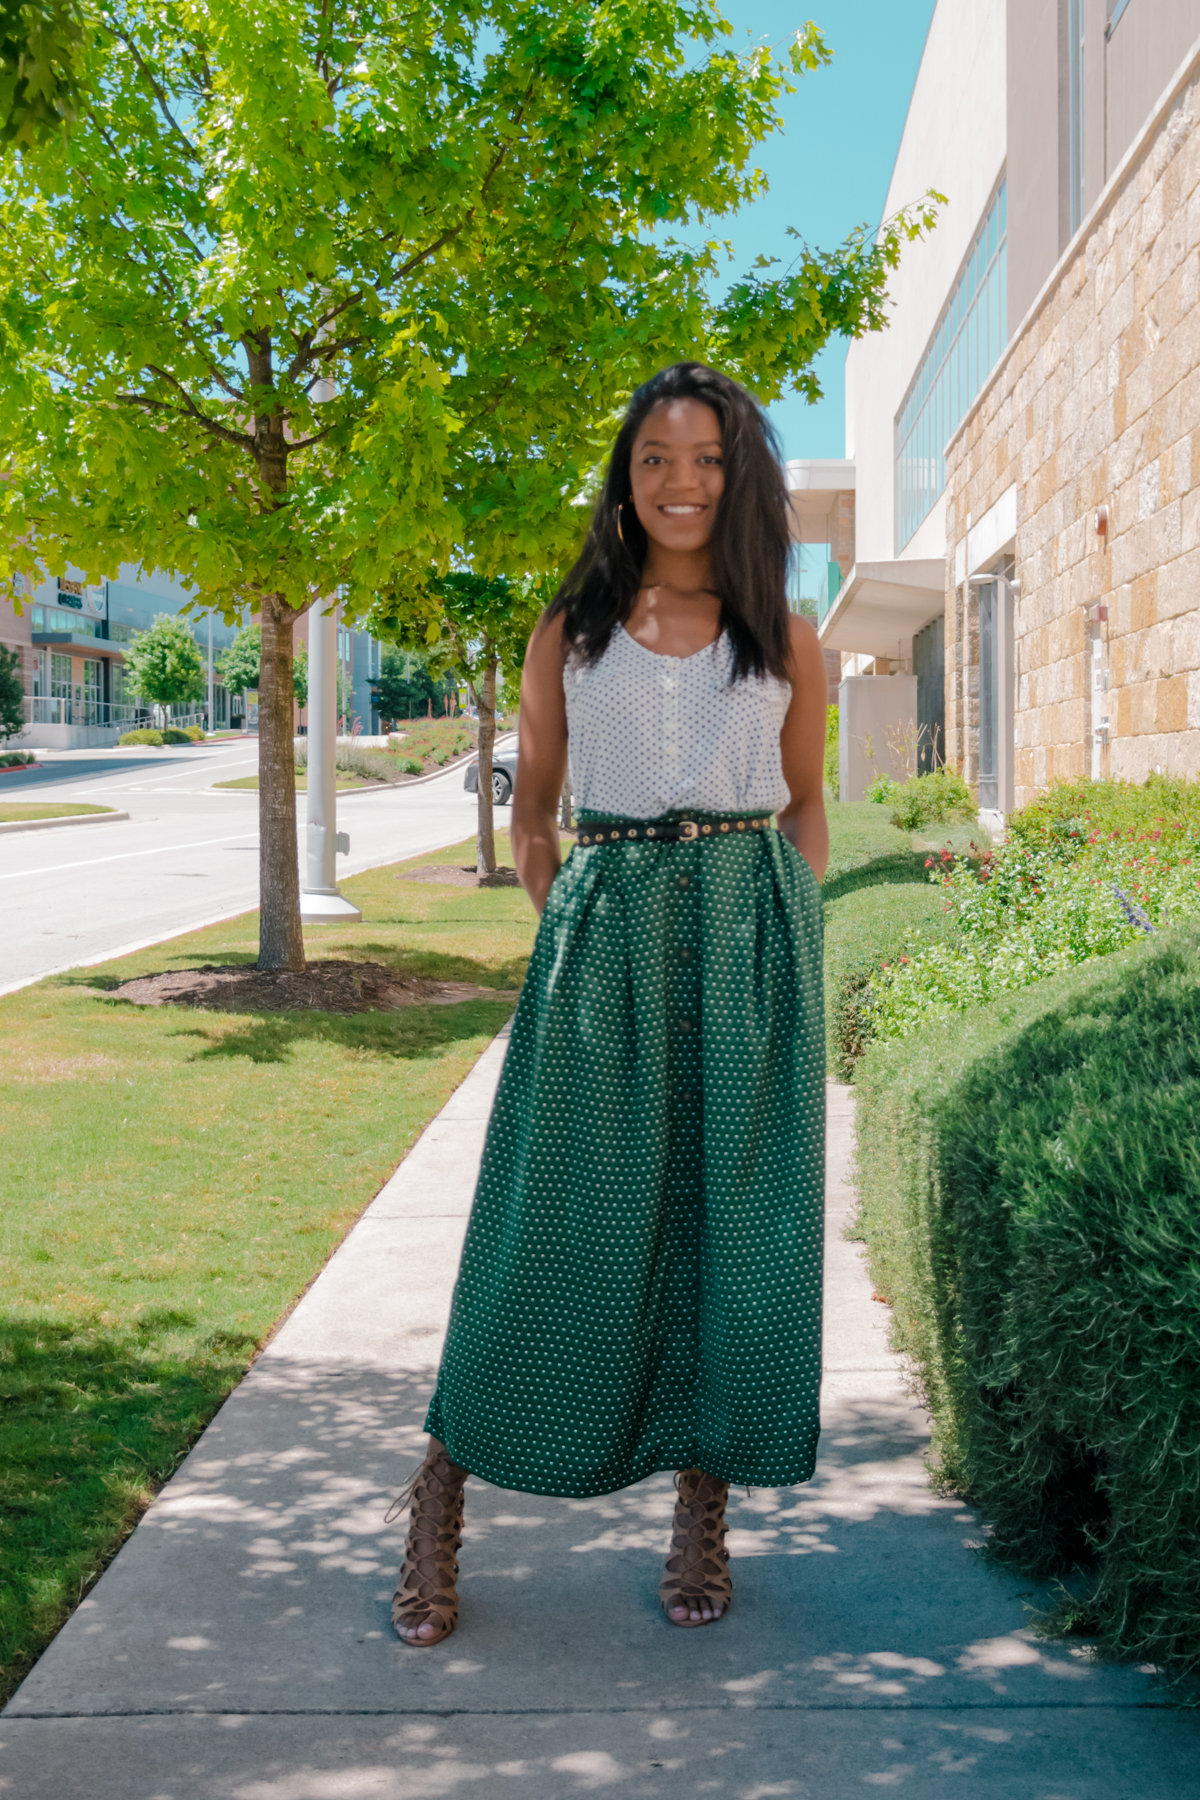 Fashion Look with long skirts